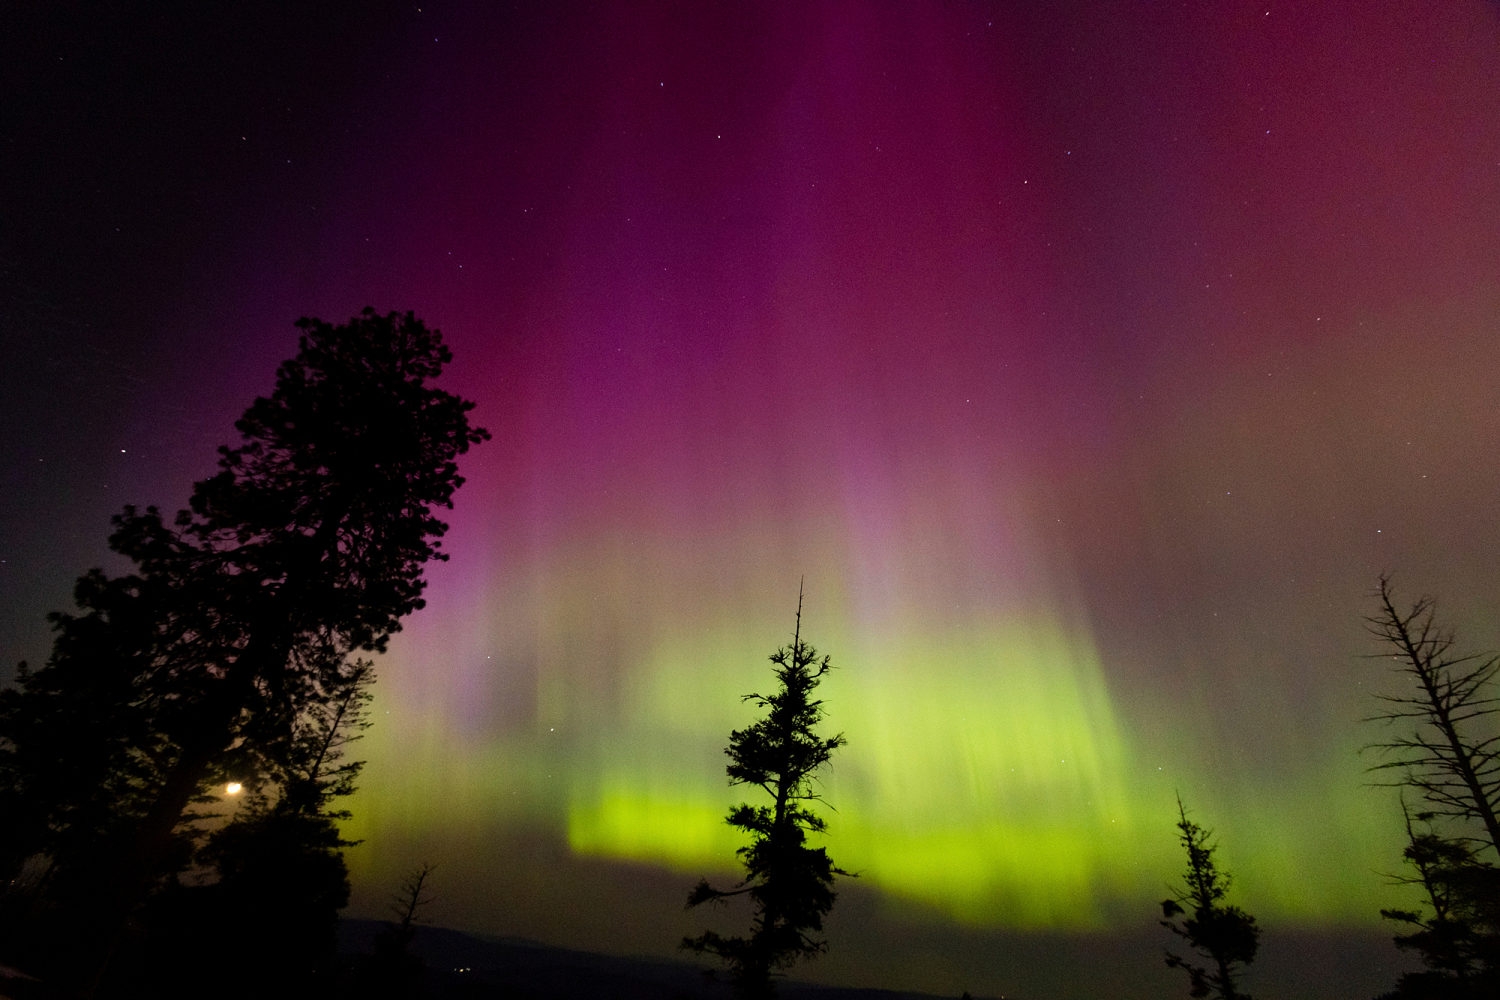 Northern lights may be visible this week over several states from New York to Idaho